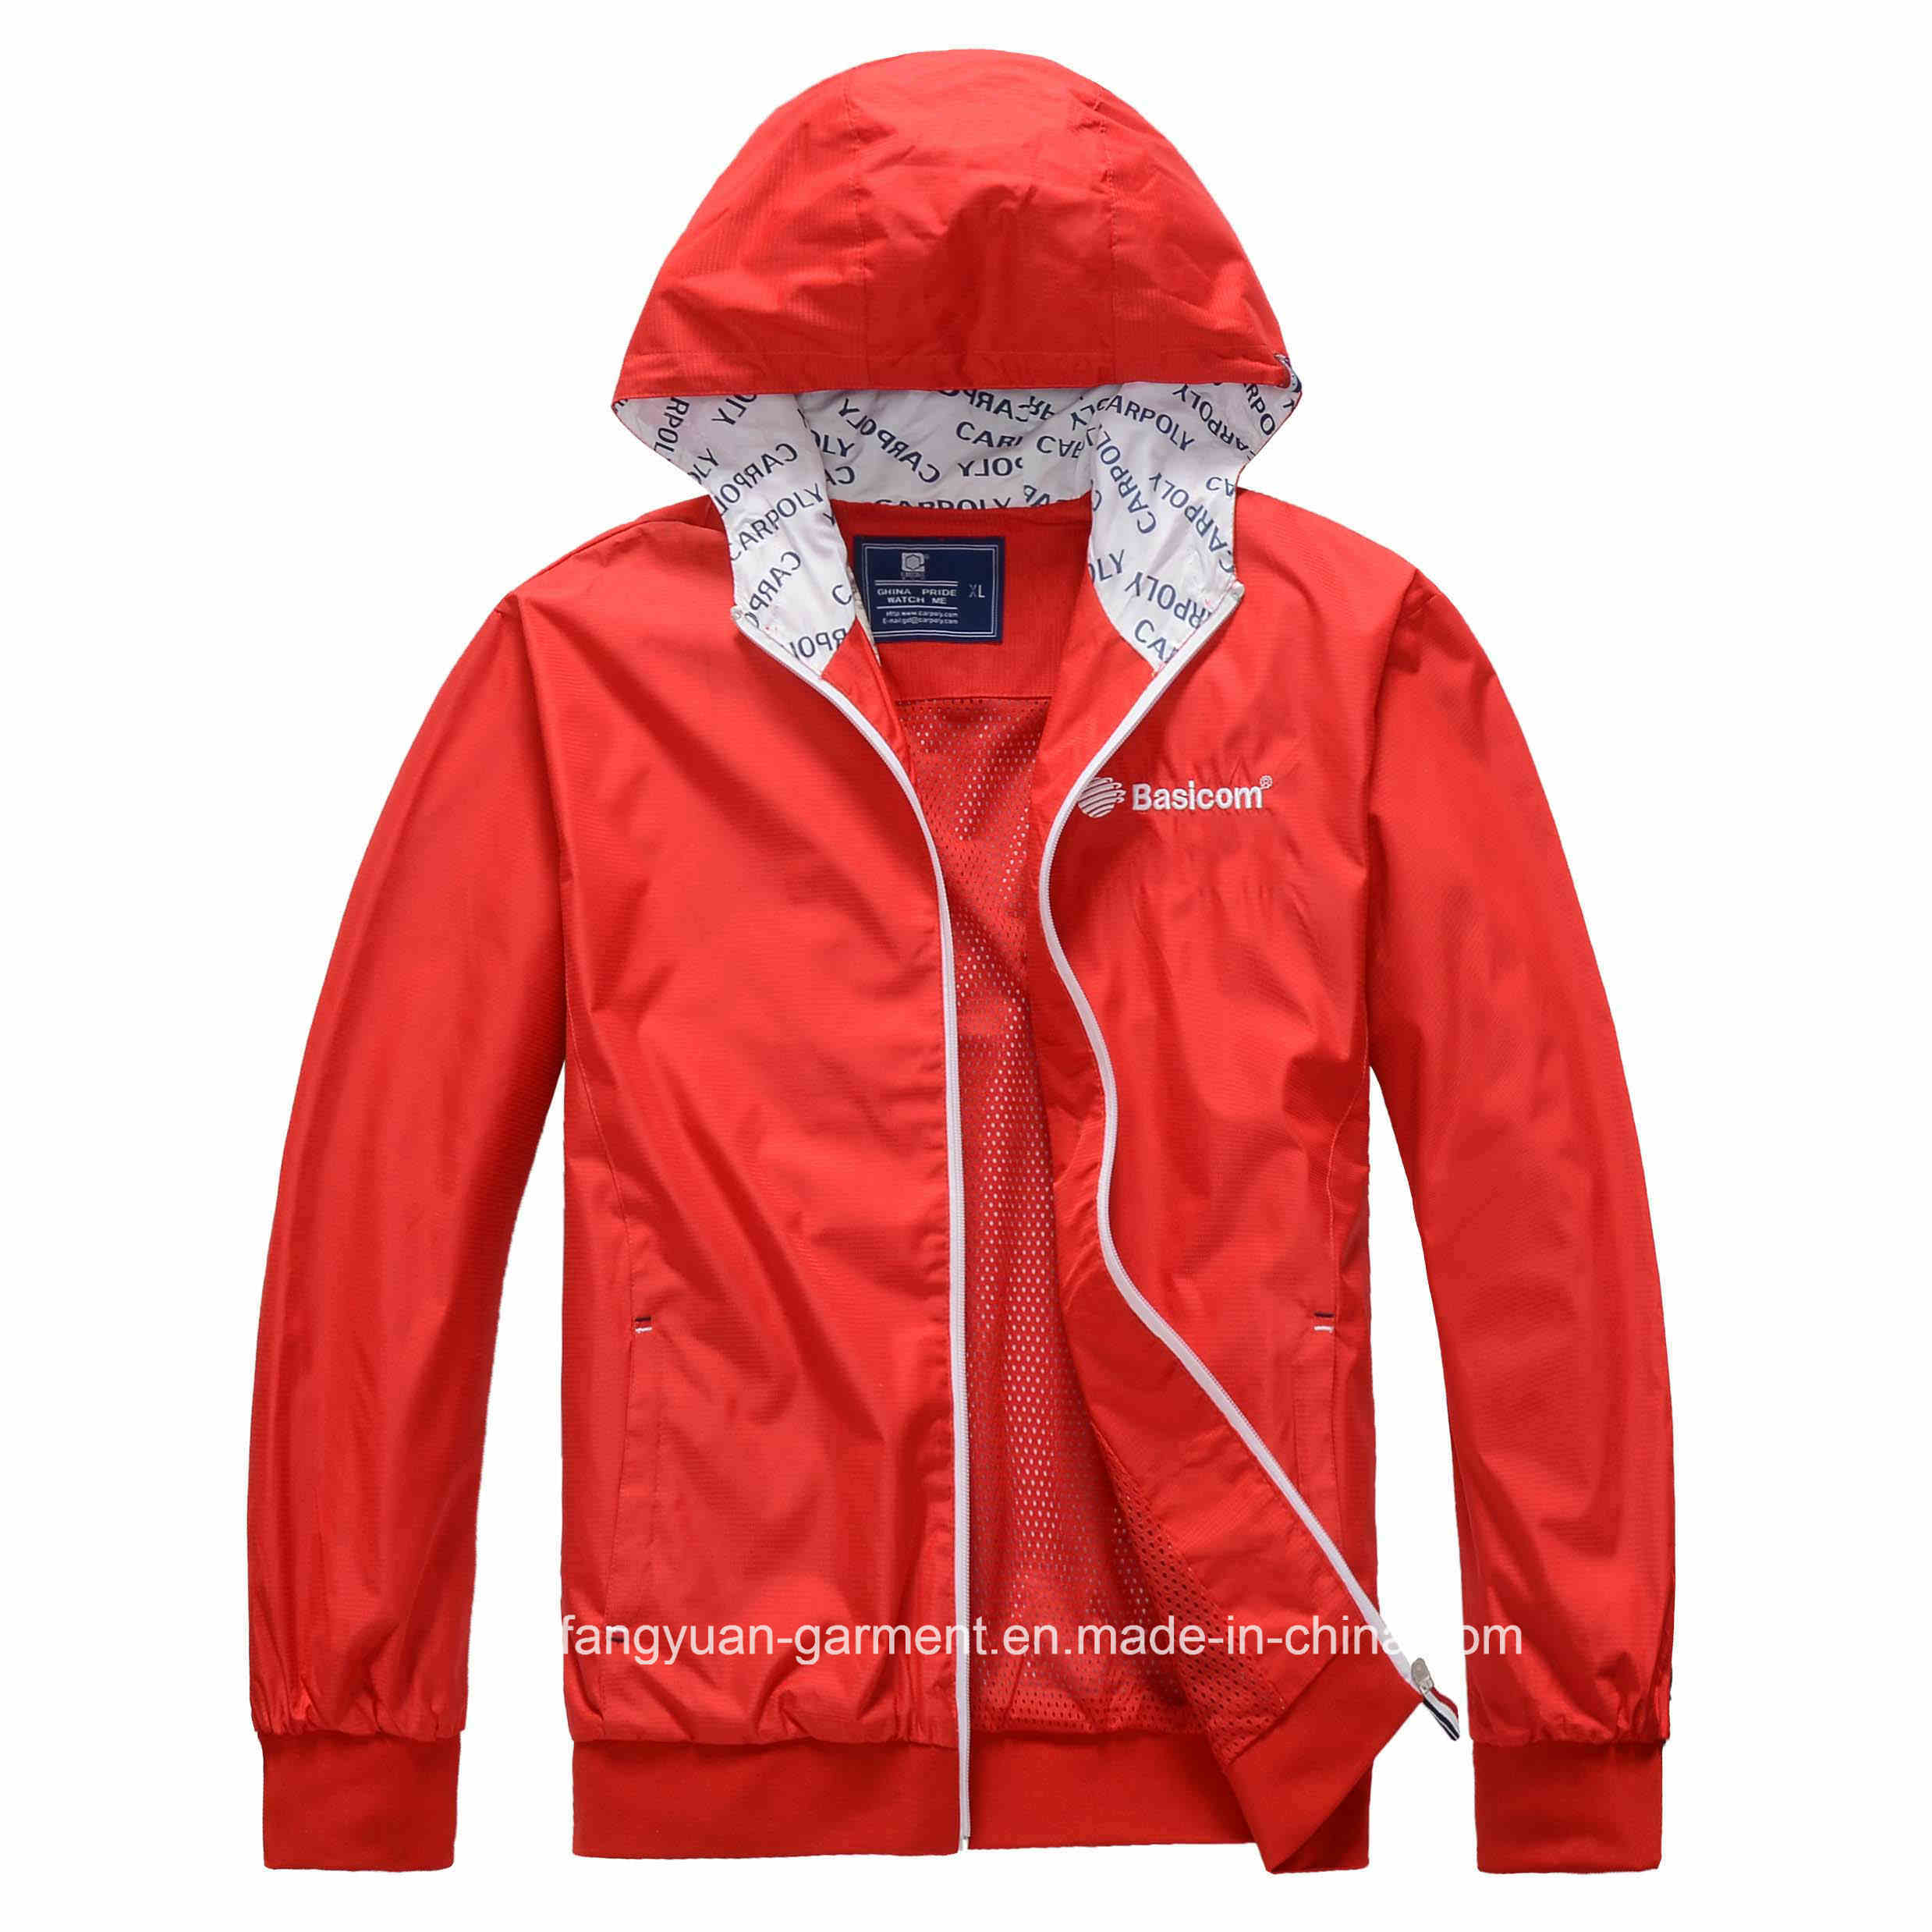 Wind Coat for Mobile Phone Selling Agent with Basicom Brand, Windproof Jacket, Promotion Uniform